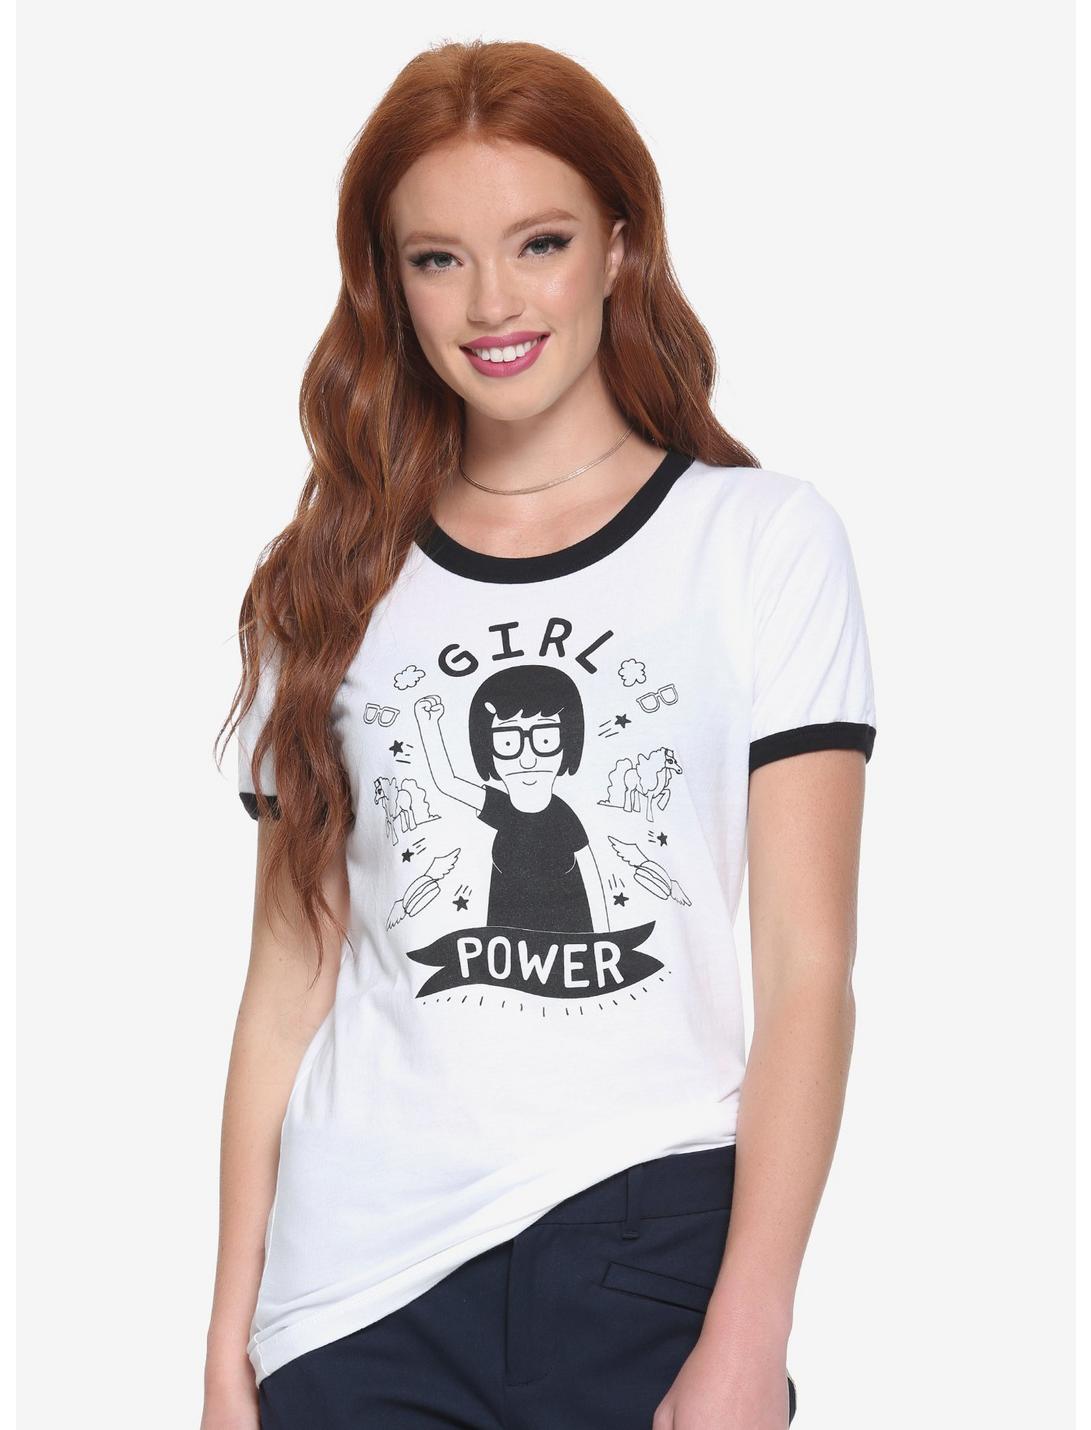 Bob's Burgers Girl Power Womens Ringer Tee - BoxLunch Exclusive | BoxLunch